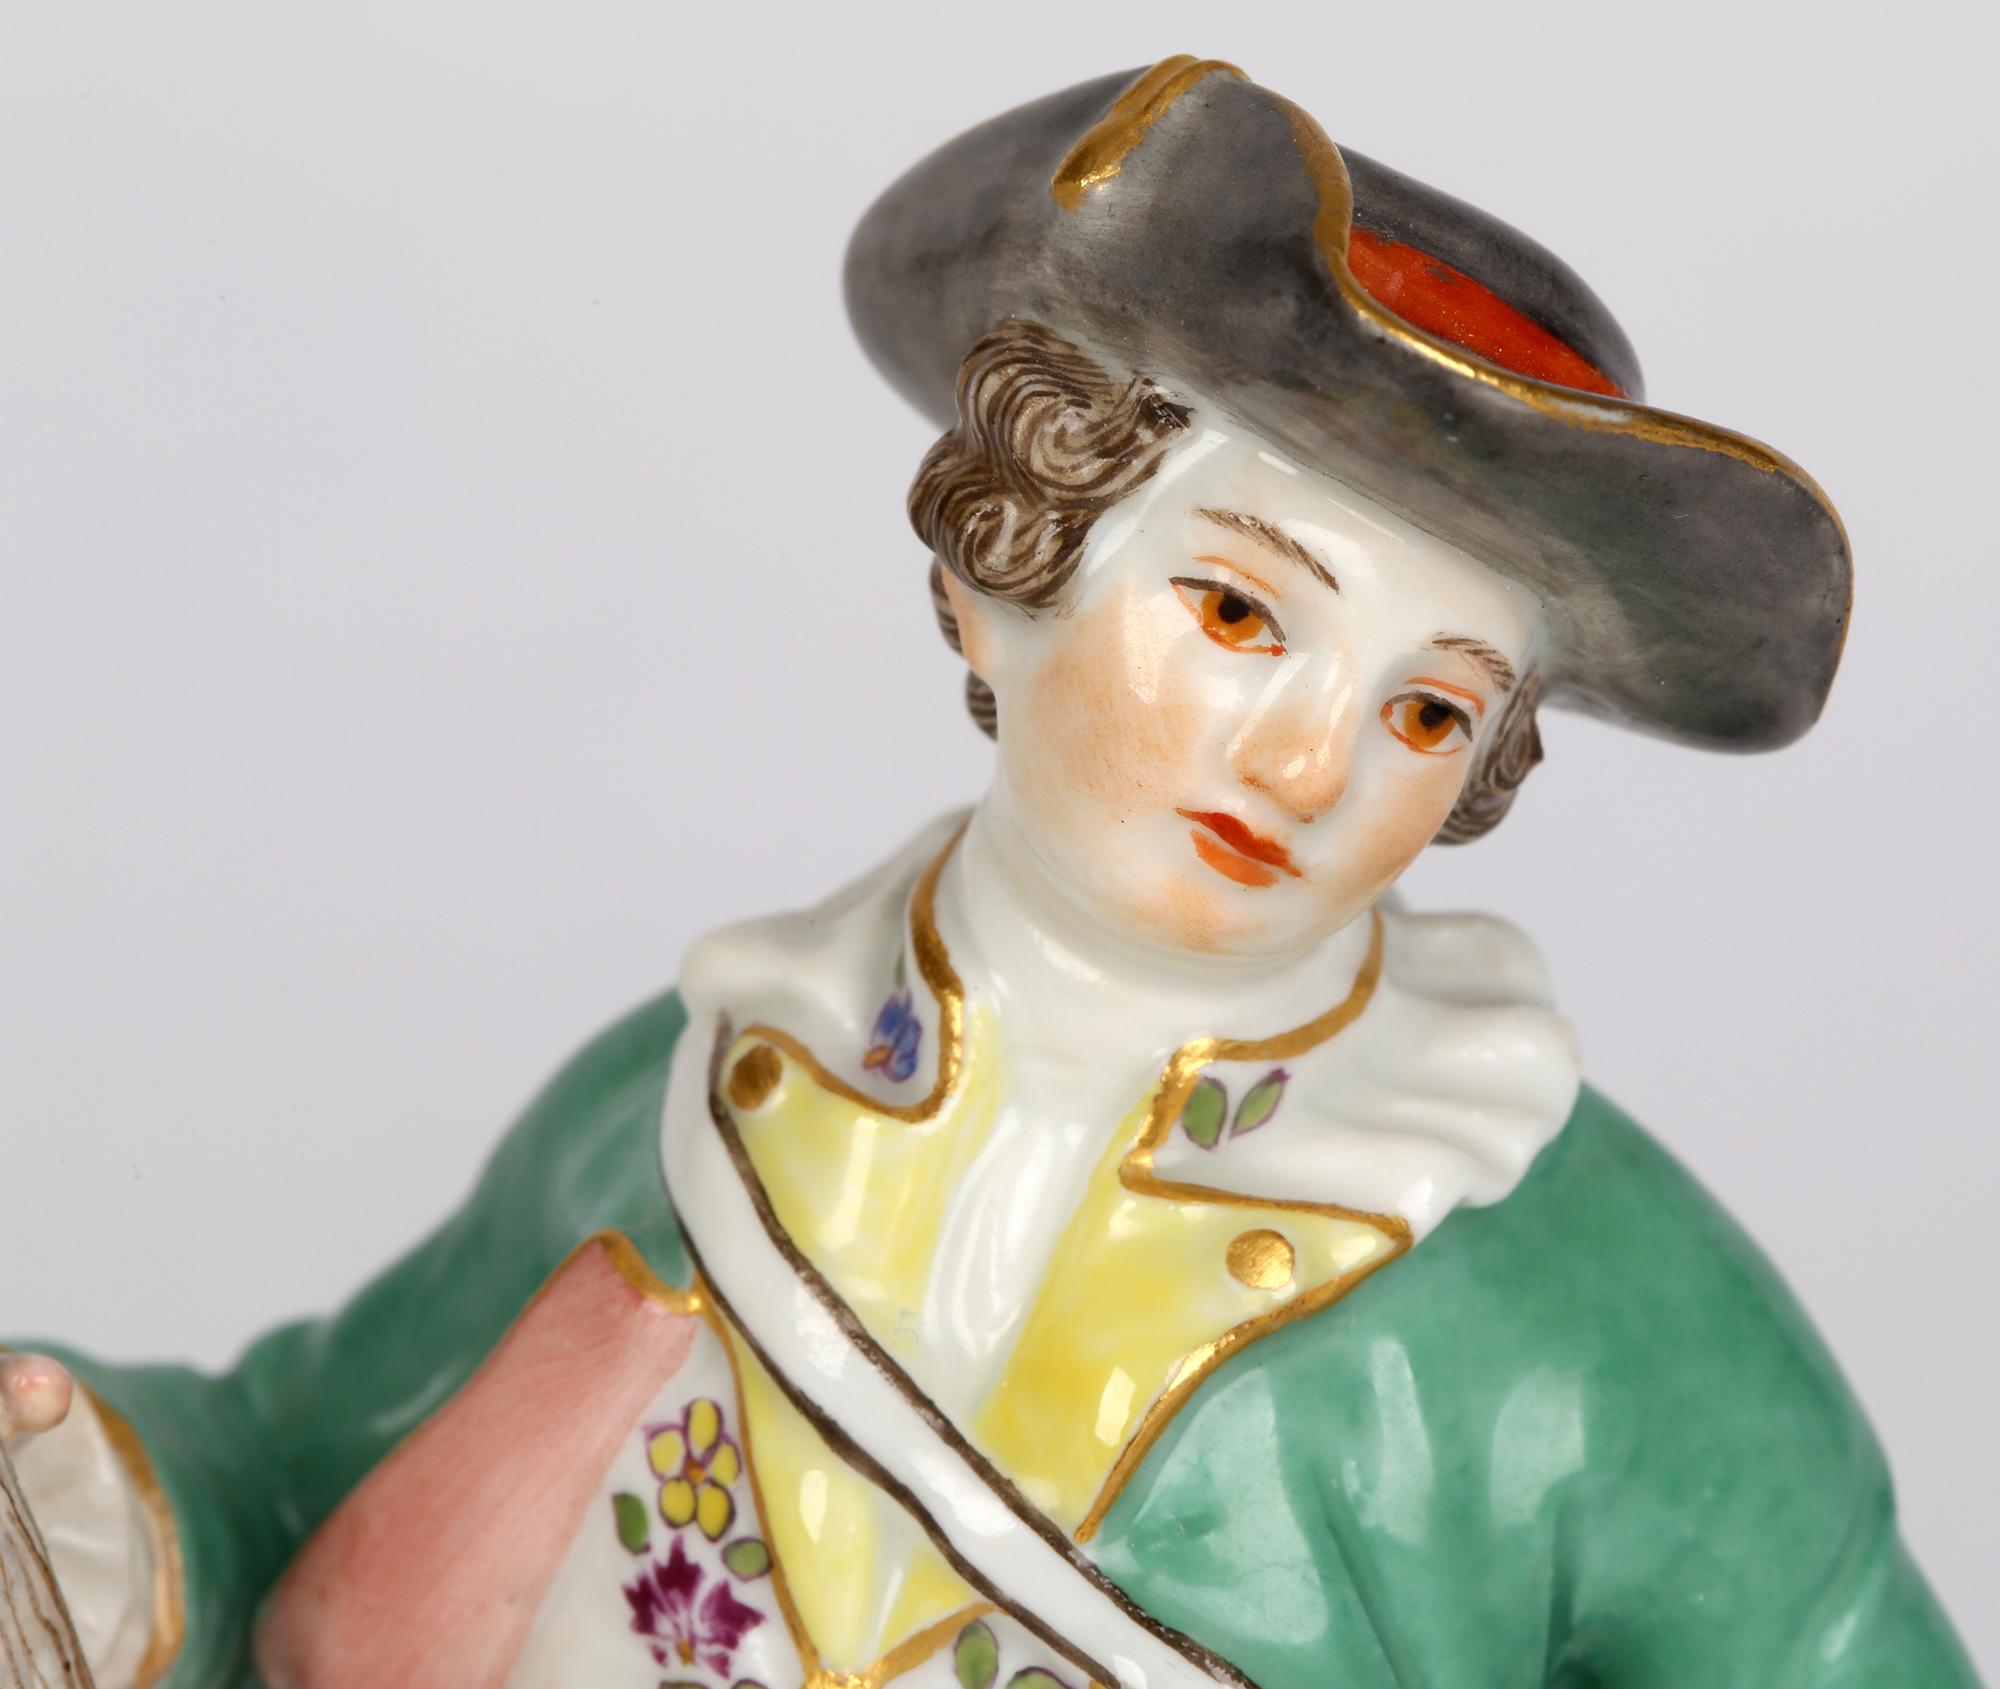 19th Century Meissen Porcelain Figure of a Boy with Wooden Staff